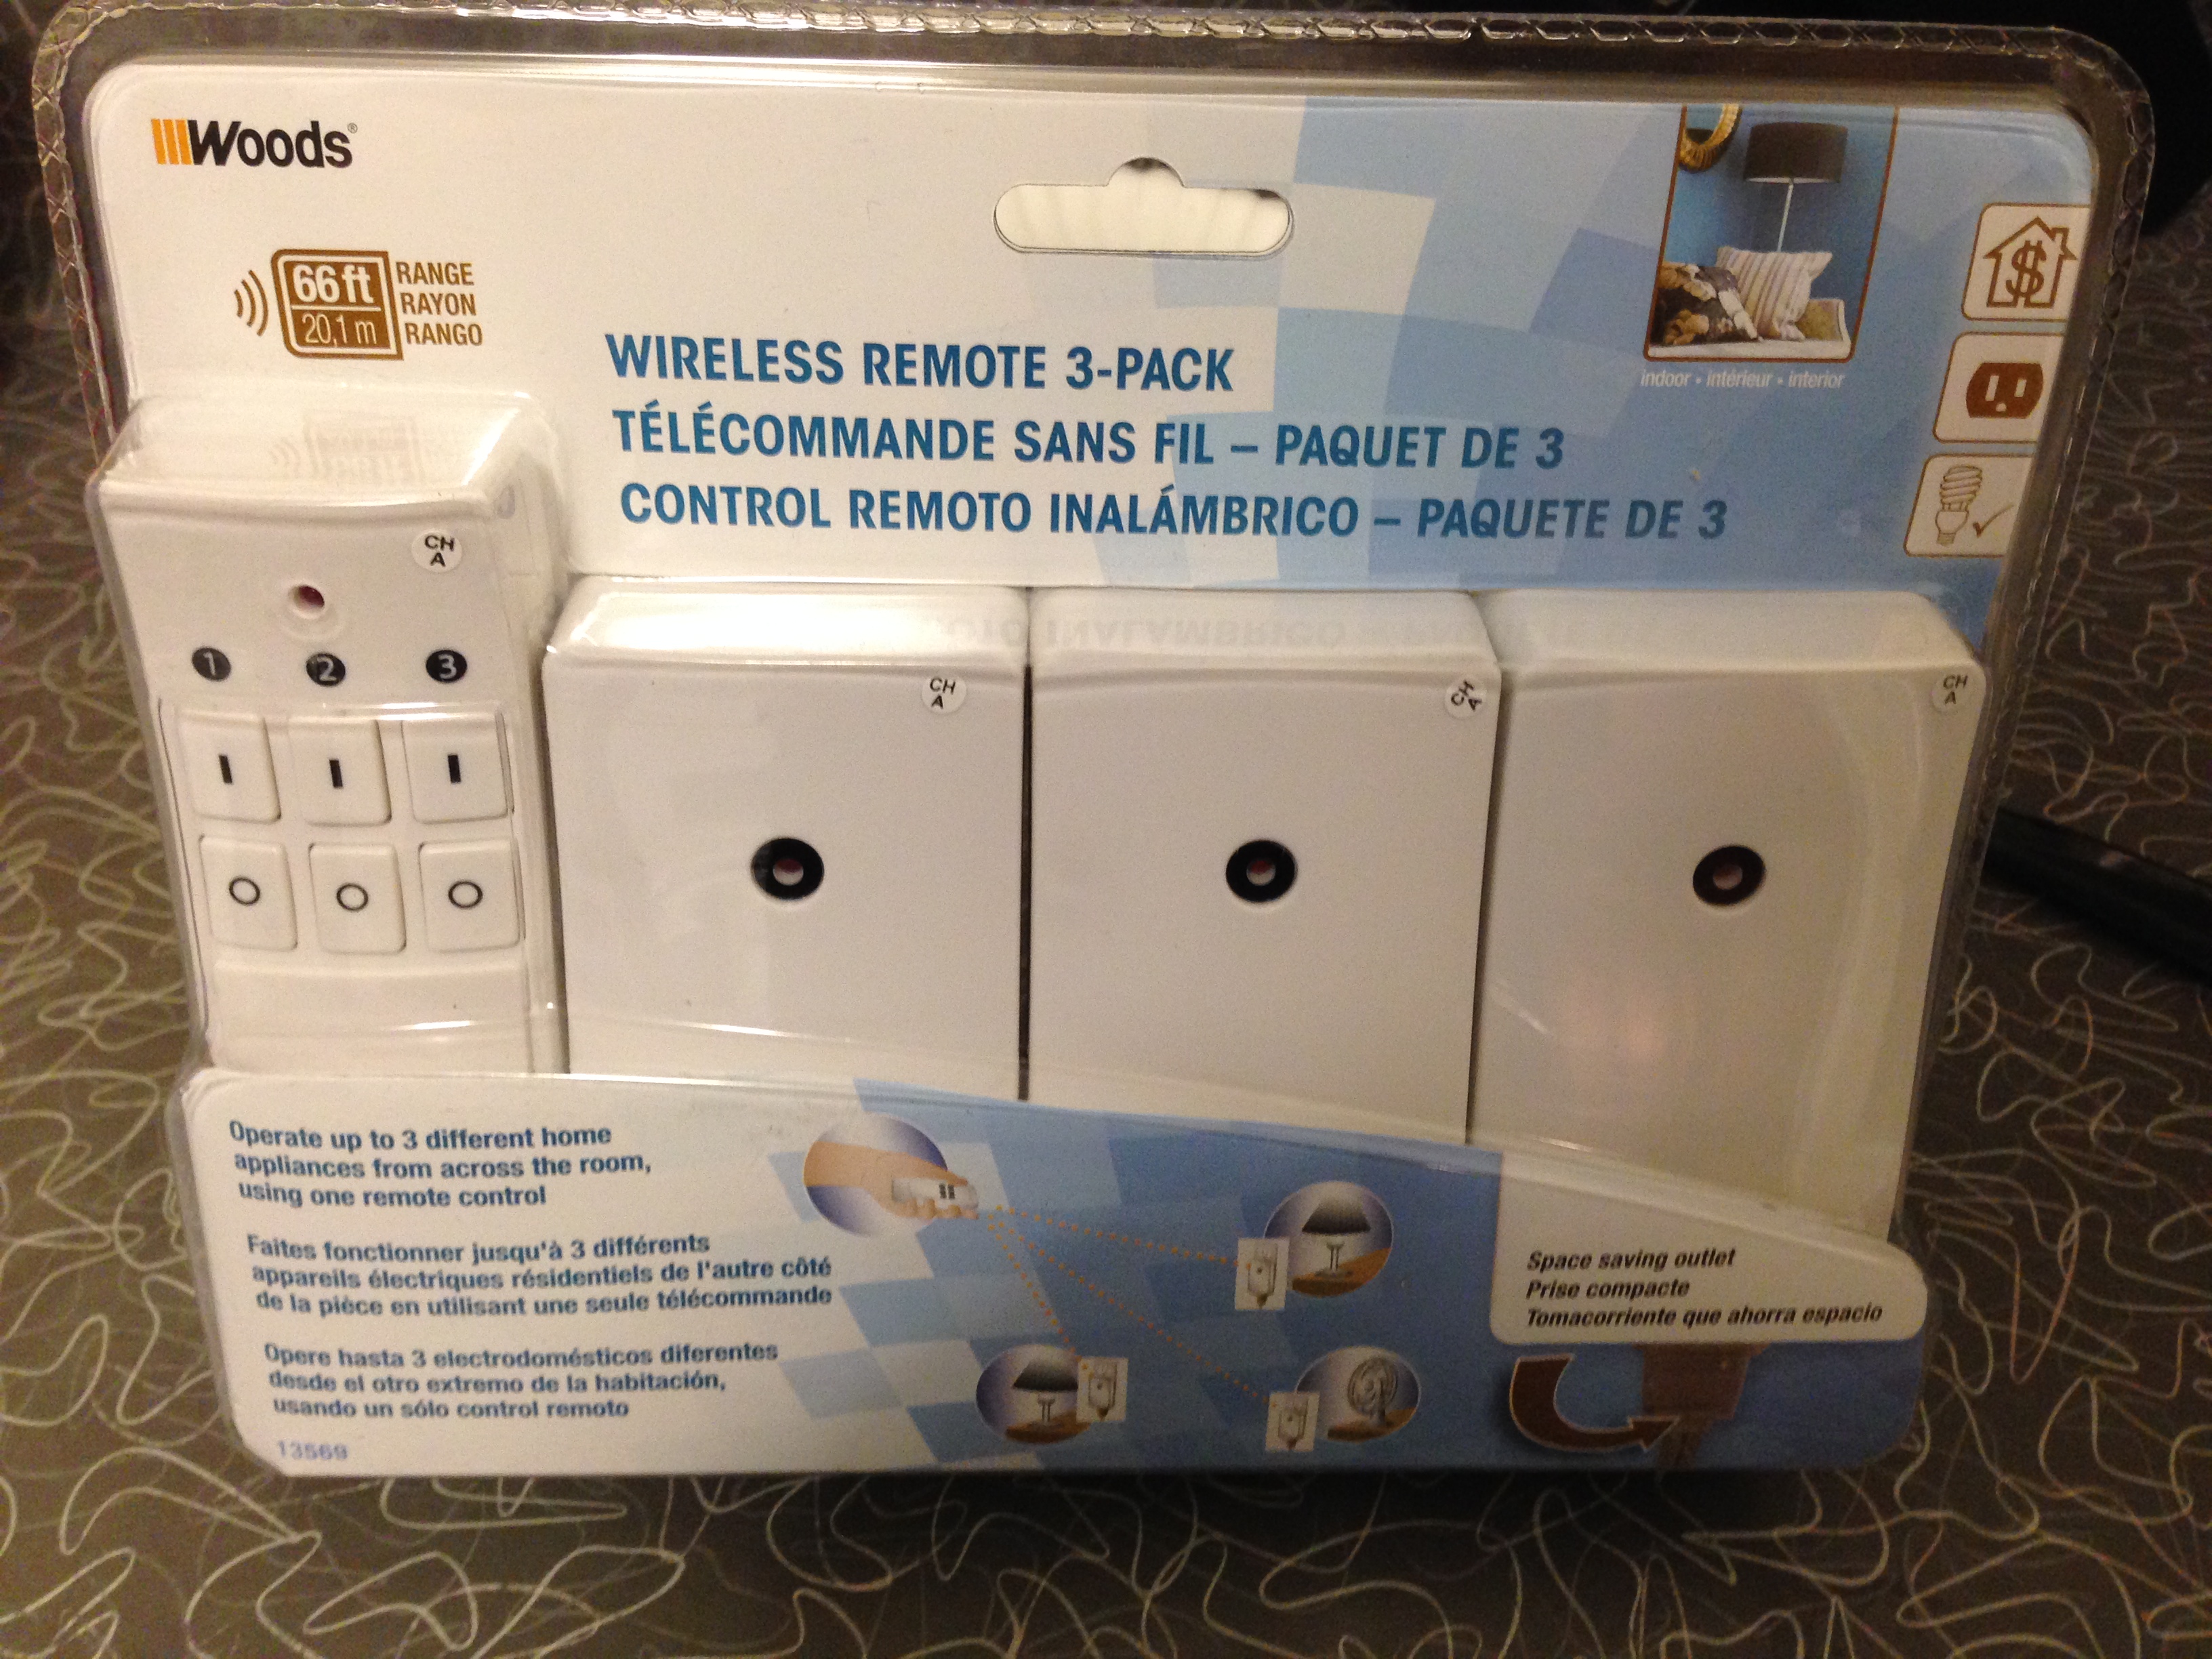 Remote-controlled outlets